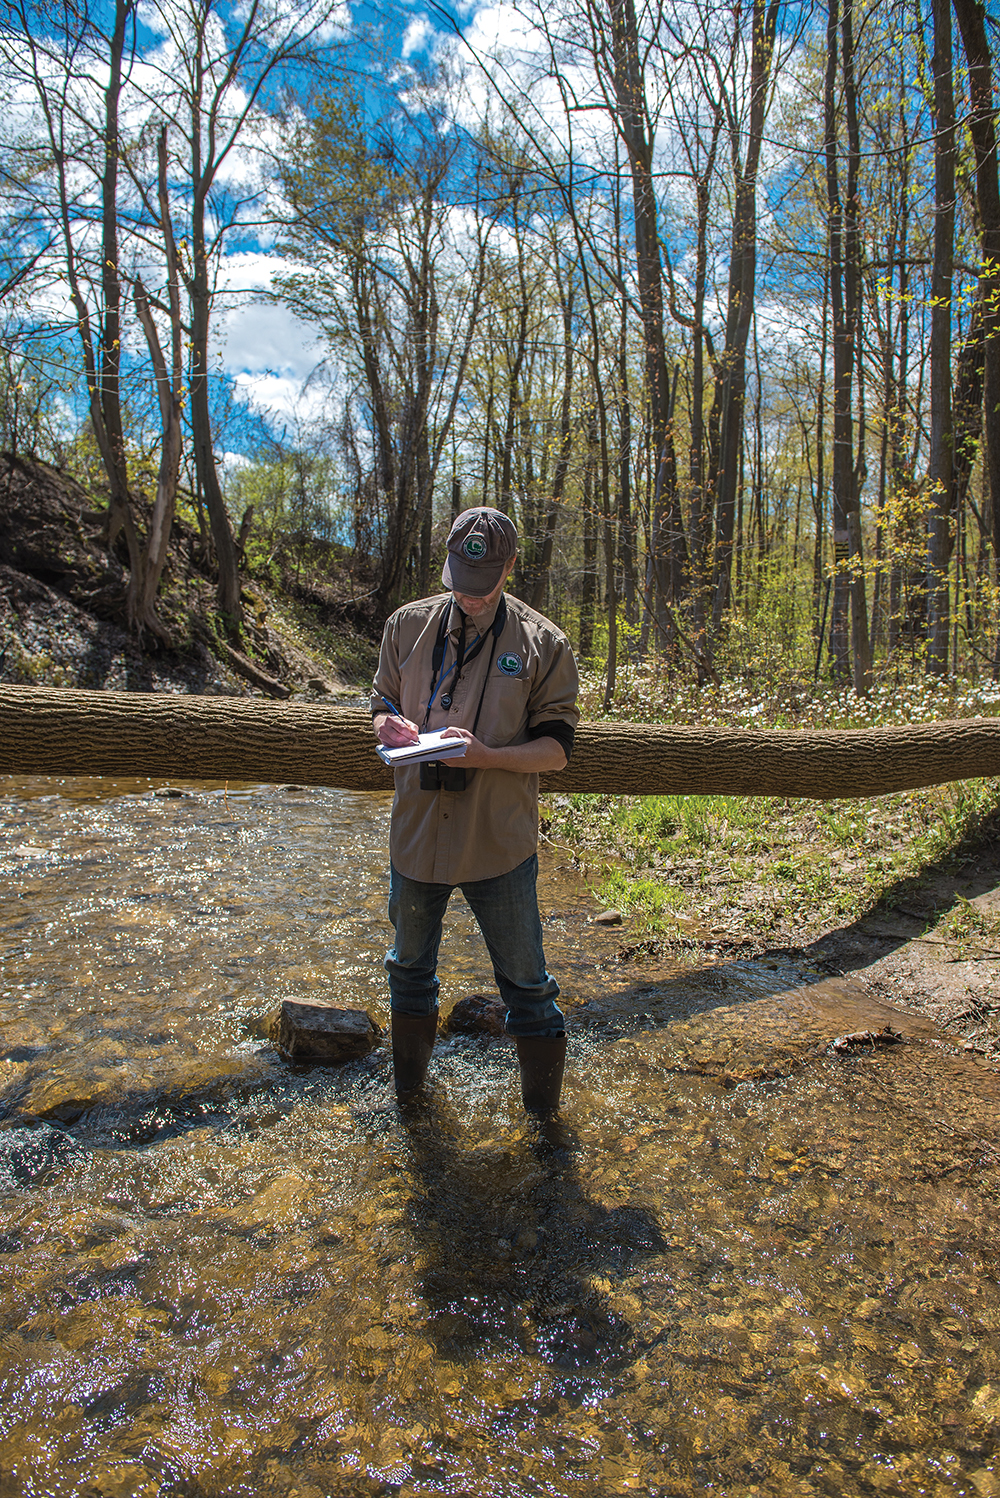 Dave Featherstone, a senior ecologist with the Nottawasaga Valley Conservation Authority, monitors the health of Collingwood’s Black Ash Creek, which runs from the top of the Niagara Escarpment through the town of Collingwood before reaching Georgian Bay via Collingwood Harbour.